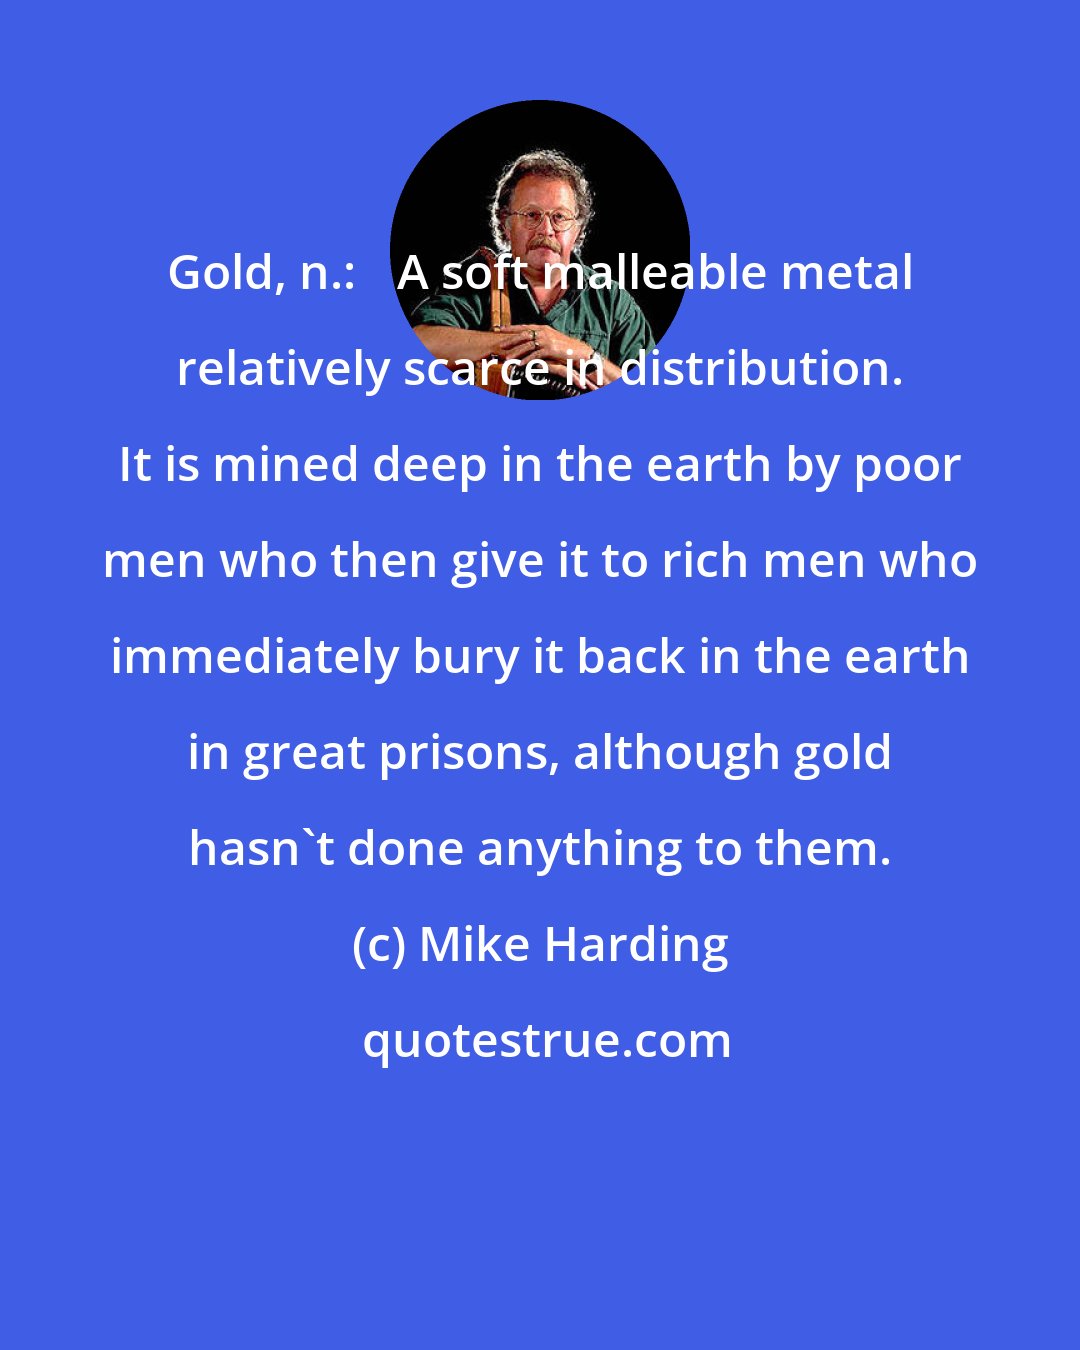 Mike Harding: Gold, n.: 	A soft malleable metal relatively scarce in distribution. It is mined deep in the earth by poor men who then give it to rich men who immediately bury it back in the earth in great prisons, although gold hasn't done anything to them.